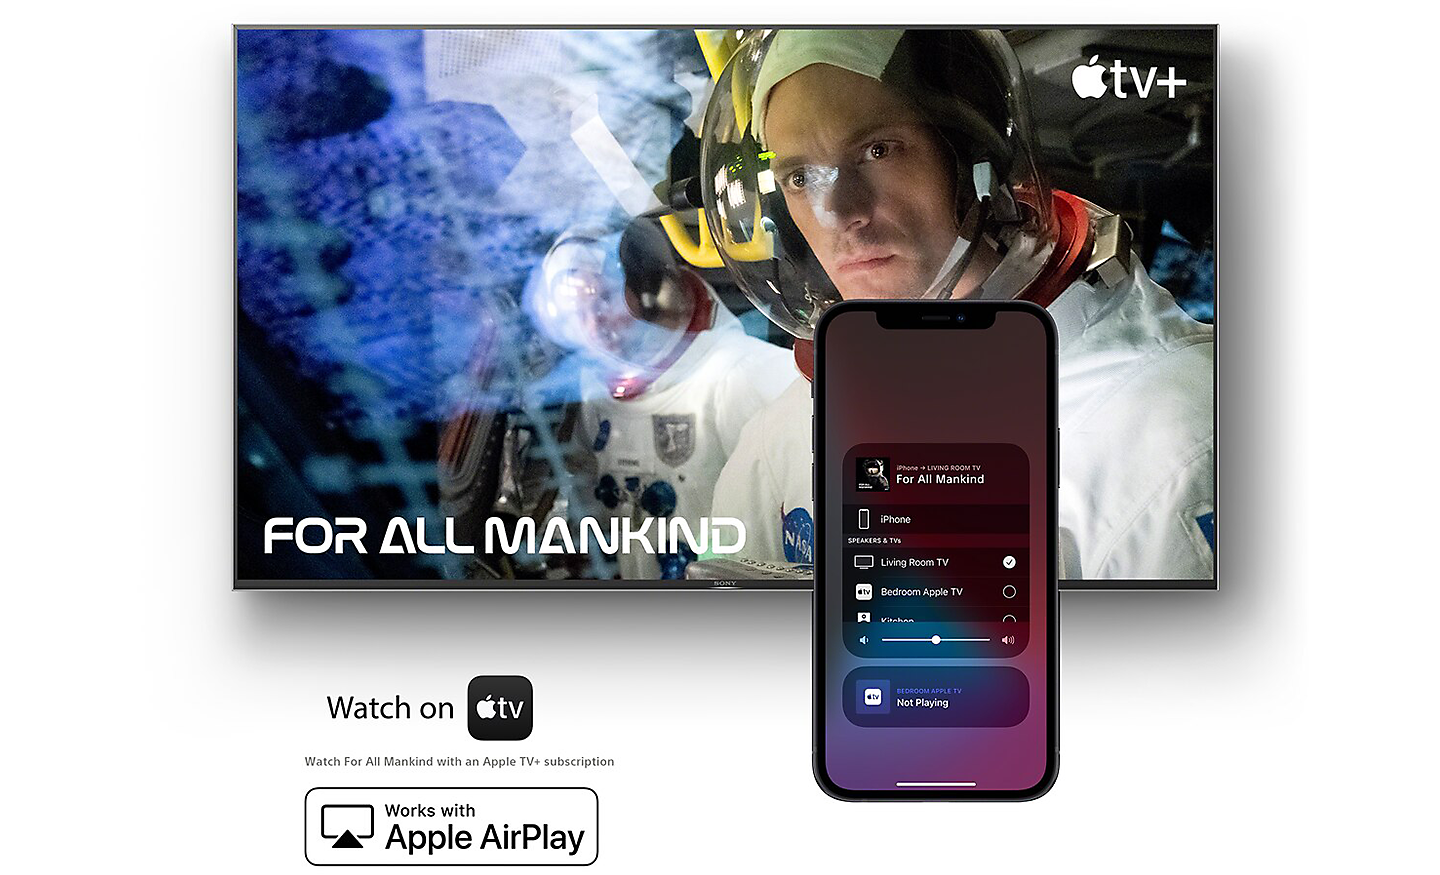 Screen showing For All Mankind on Apple TV with a smartphone in front